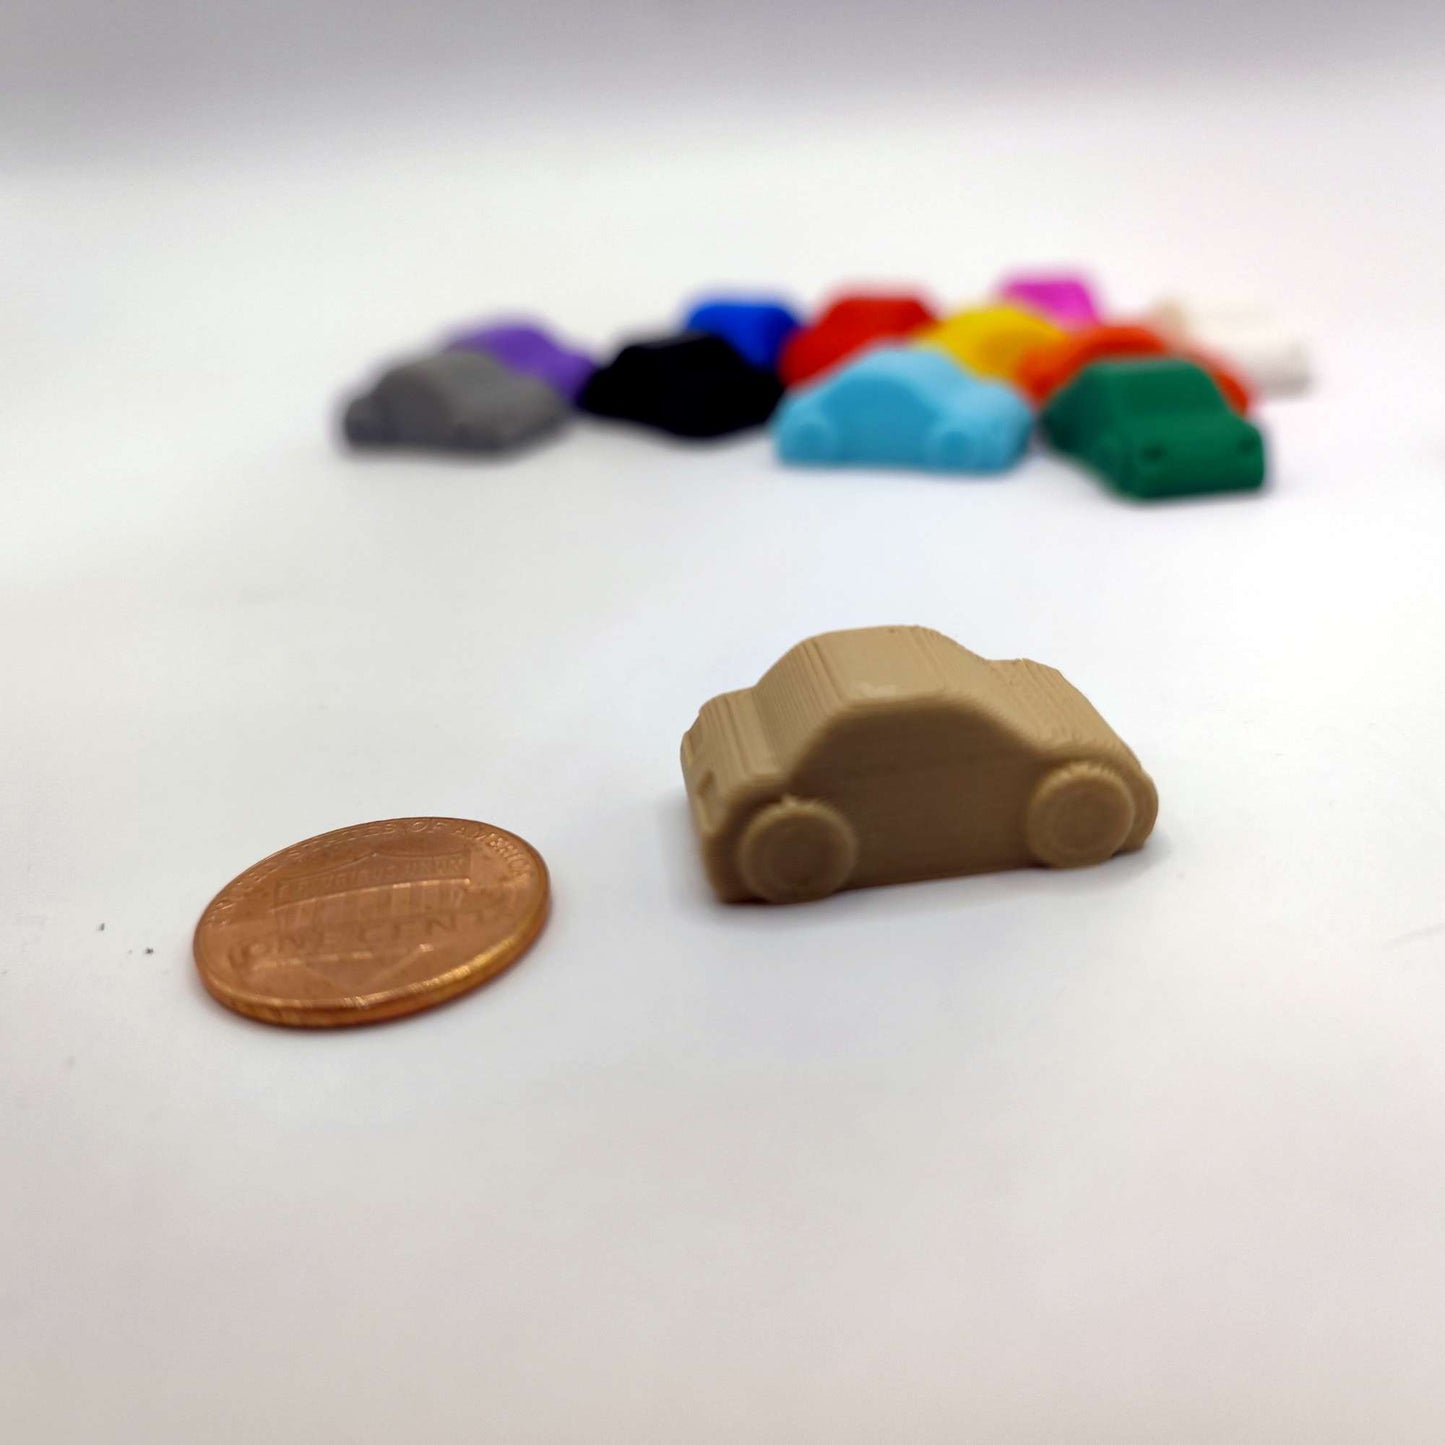 Small Game Tokens Shaped as Cars 13 various colors